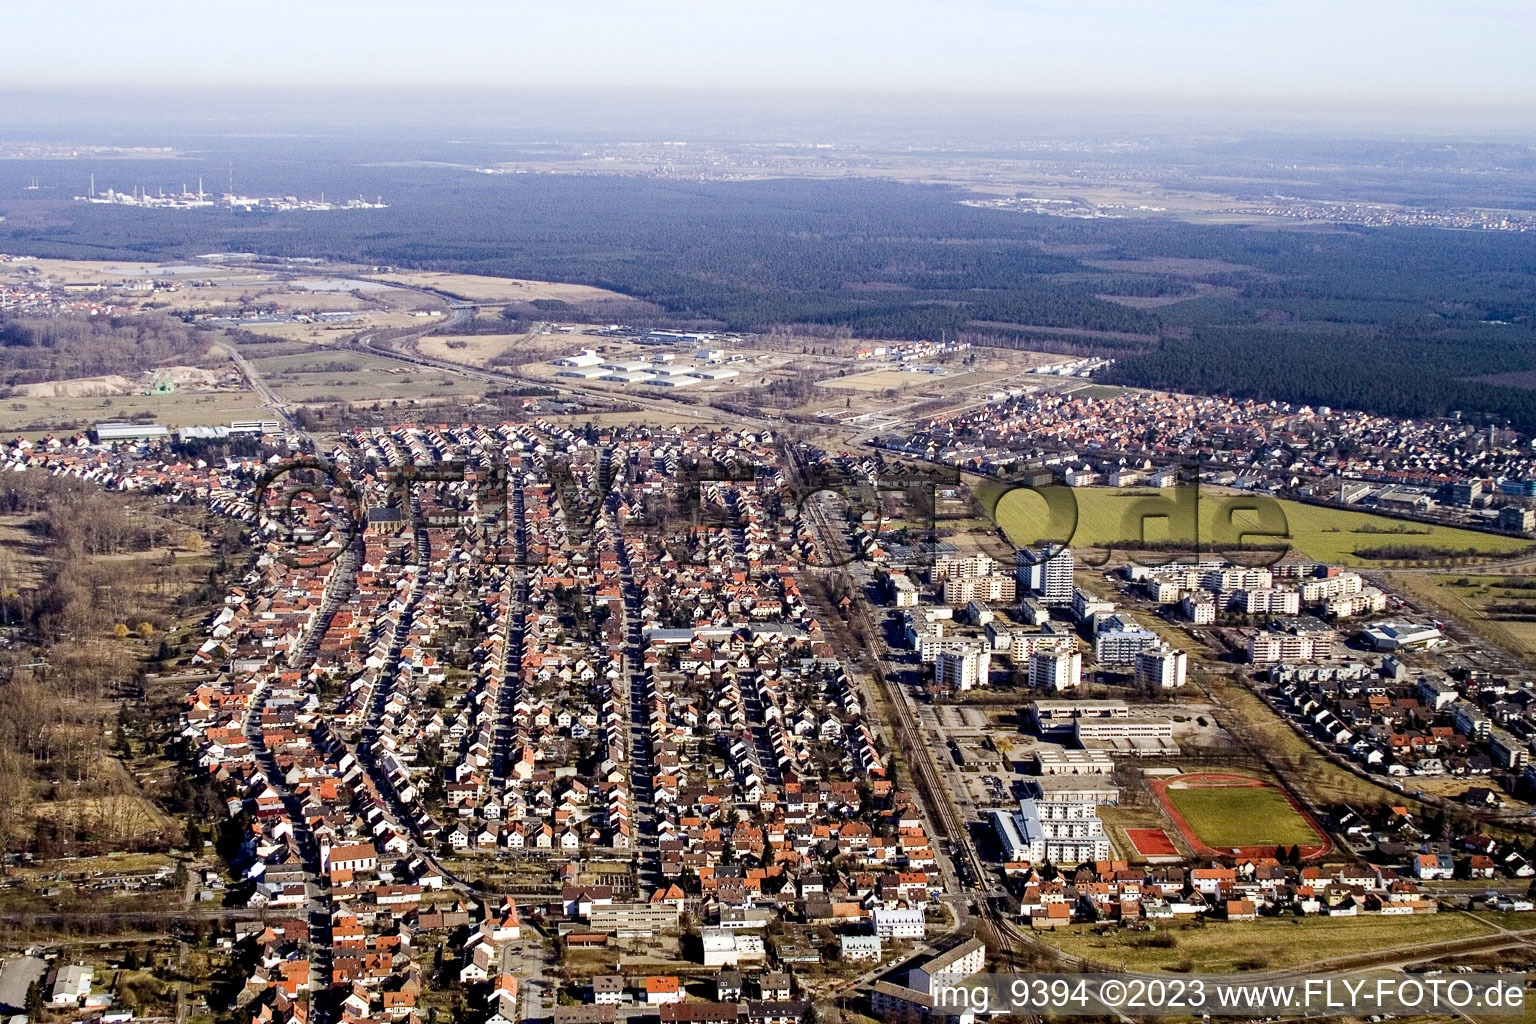 Aerial photograpy of From the south in the district Neureut in Karlsruhe in the state Baden-Wuerttemberg, Germany